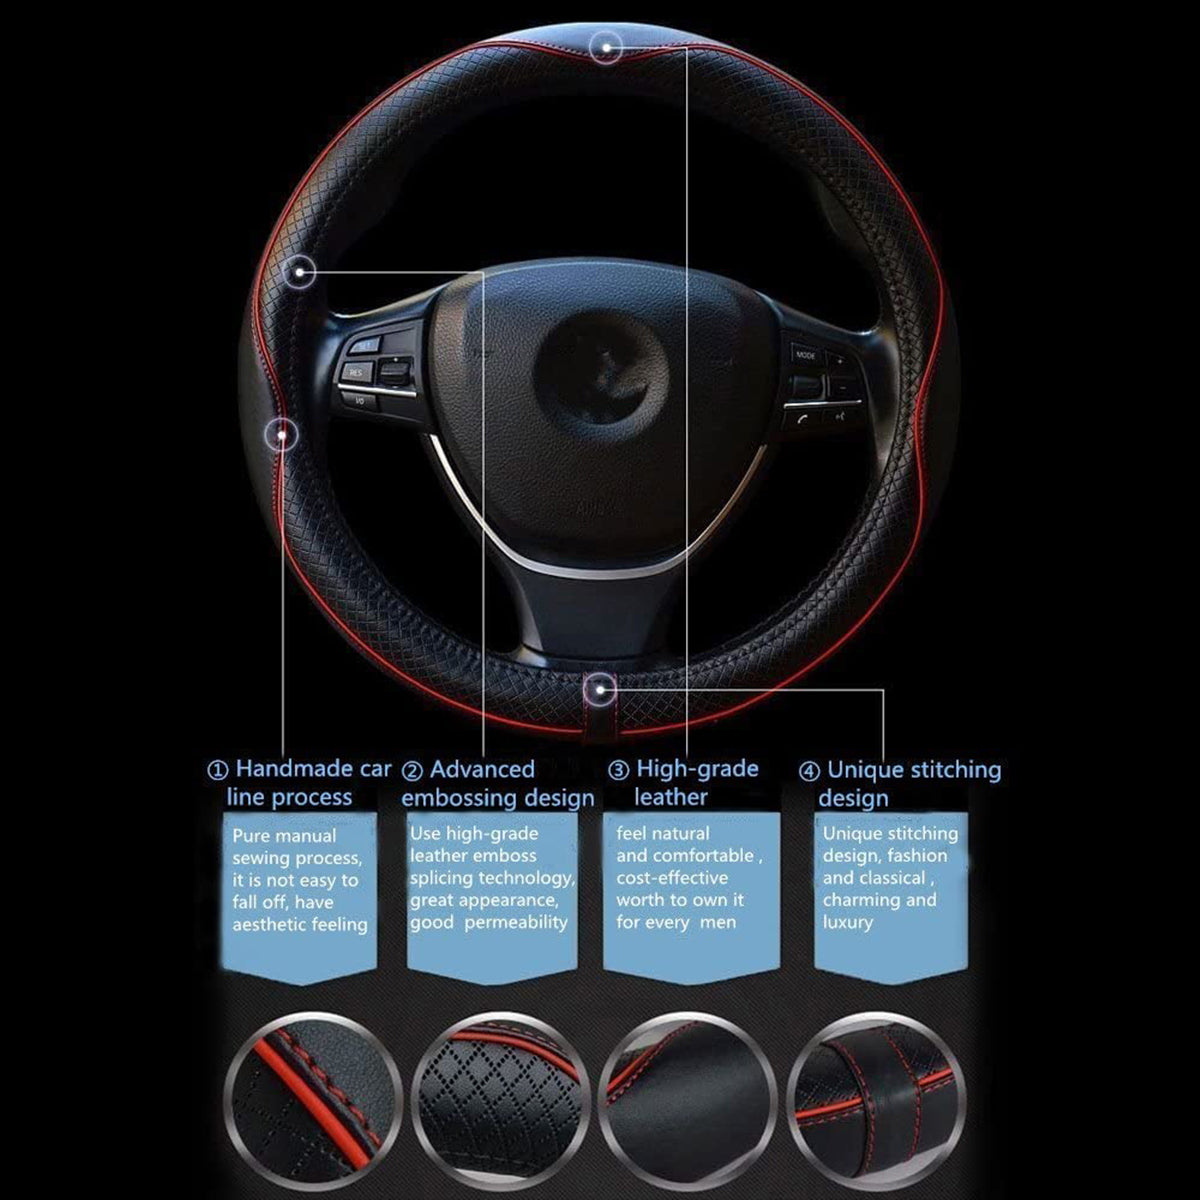 Car Steering Wheel Cover, Custom For Your Cars, Anti-Slip, Safety, Soft, Breathable, Heavy Duty, Thick, Full Surround, Sports Style, Car Accessories MT18990 - Delicate Leather